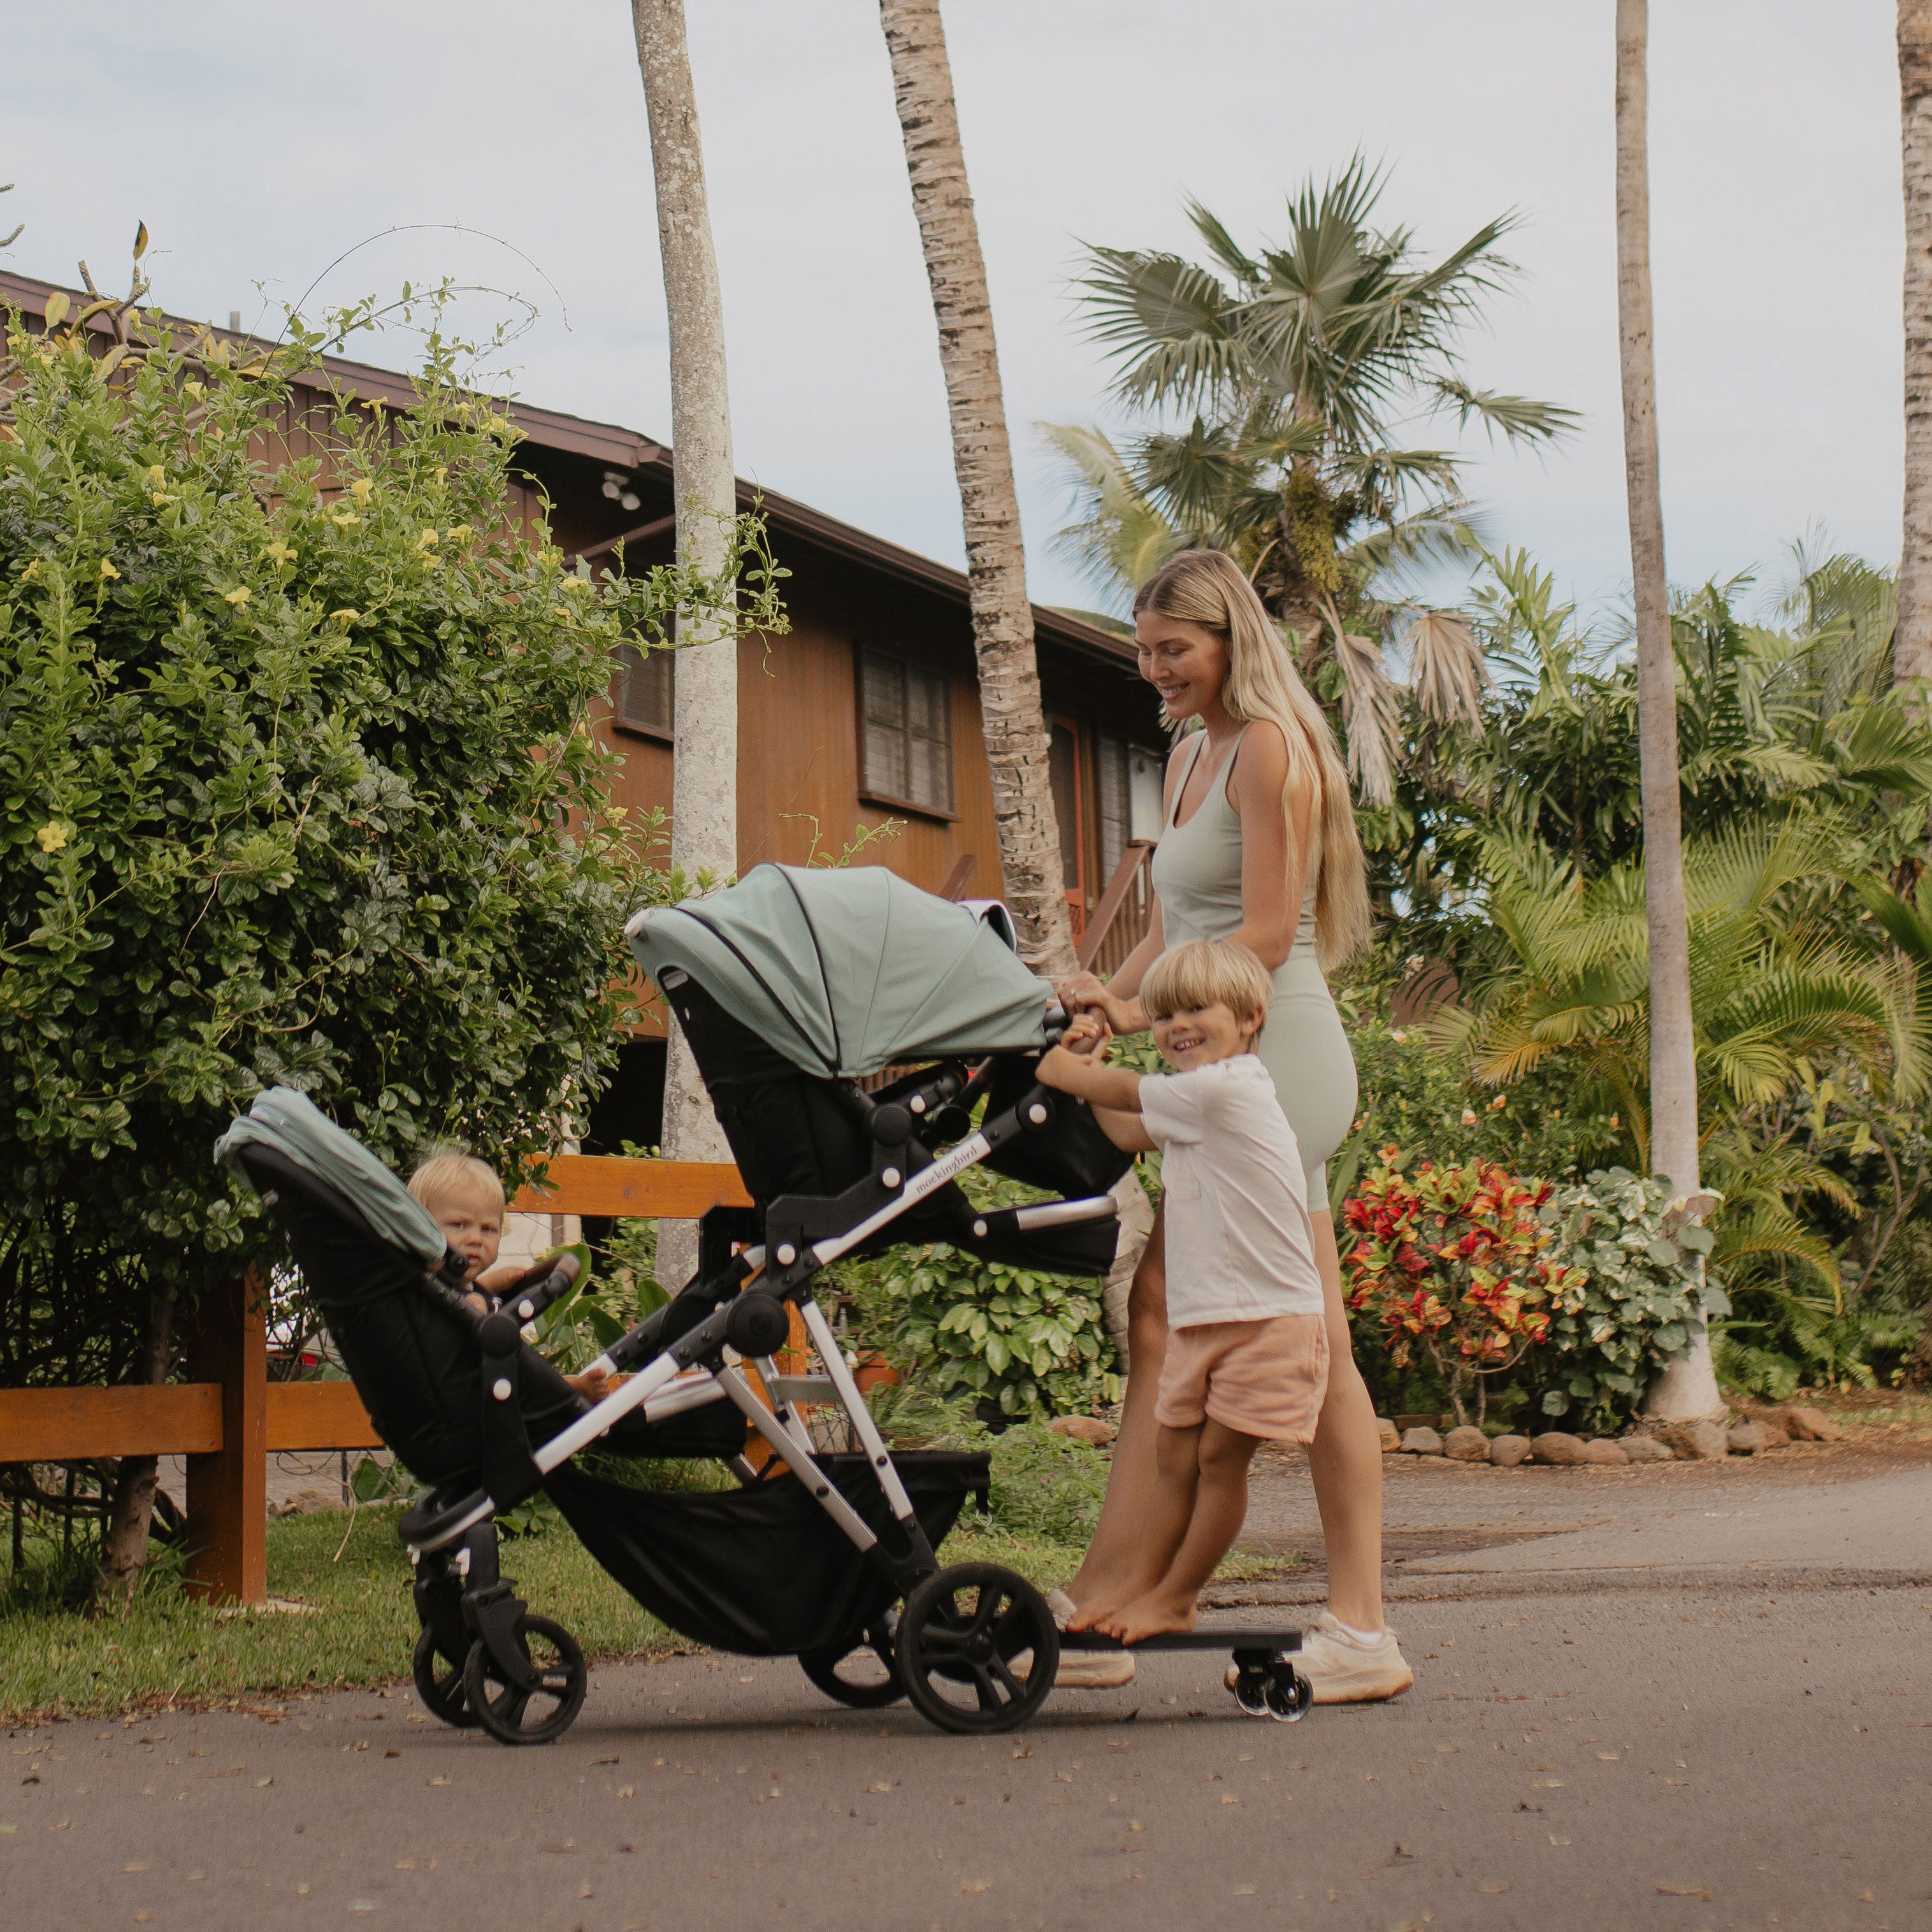 A woman strolls outdoors with a baby in a stroller, accompanied by a young boy on a skateboard, in a tropical setting with palm trees.